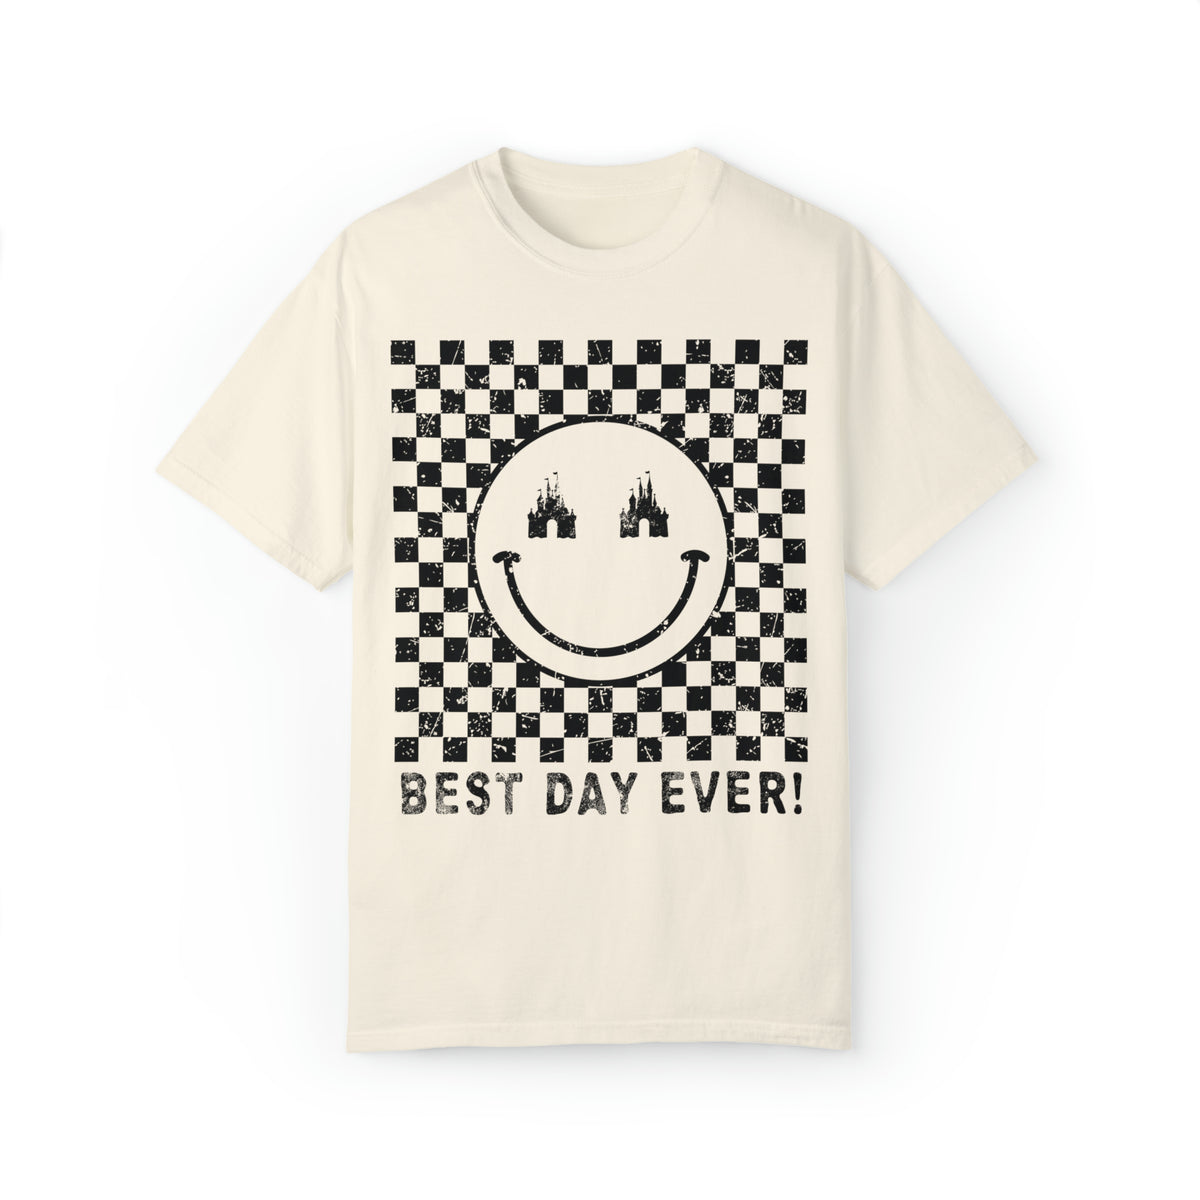 Retro Checkered Best Day Ever Comfort Colors Unisex Garment-Dyed T-shirt